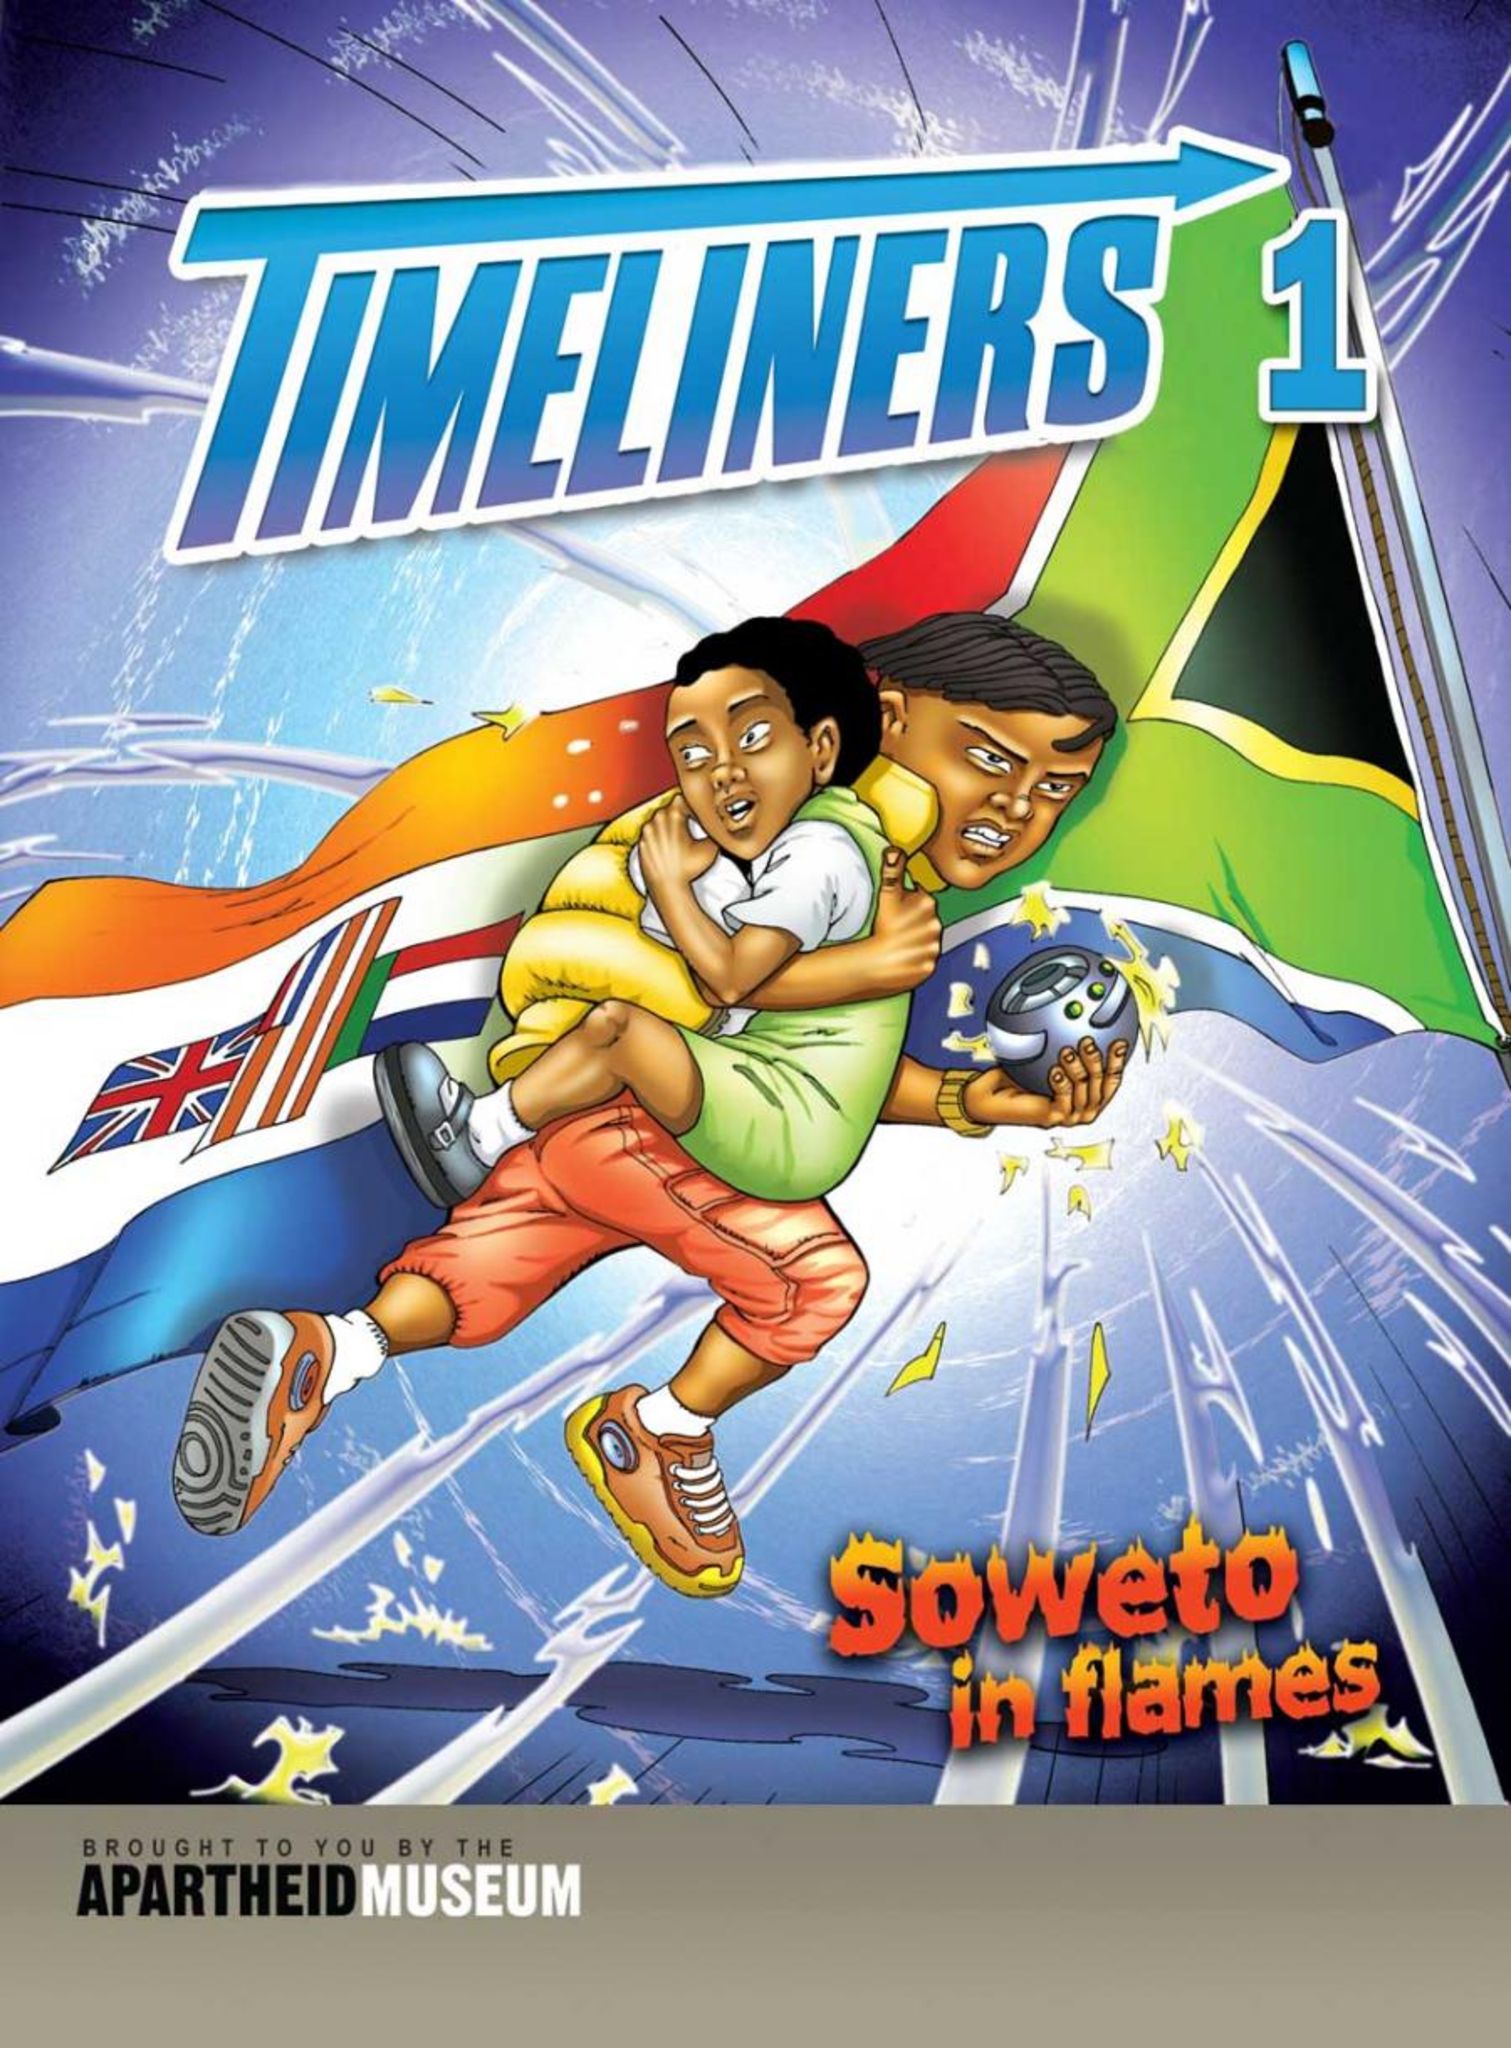 Cover of the first "Timeliners" comic, issued by Apartheid Museum in 2004.